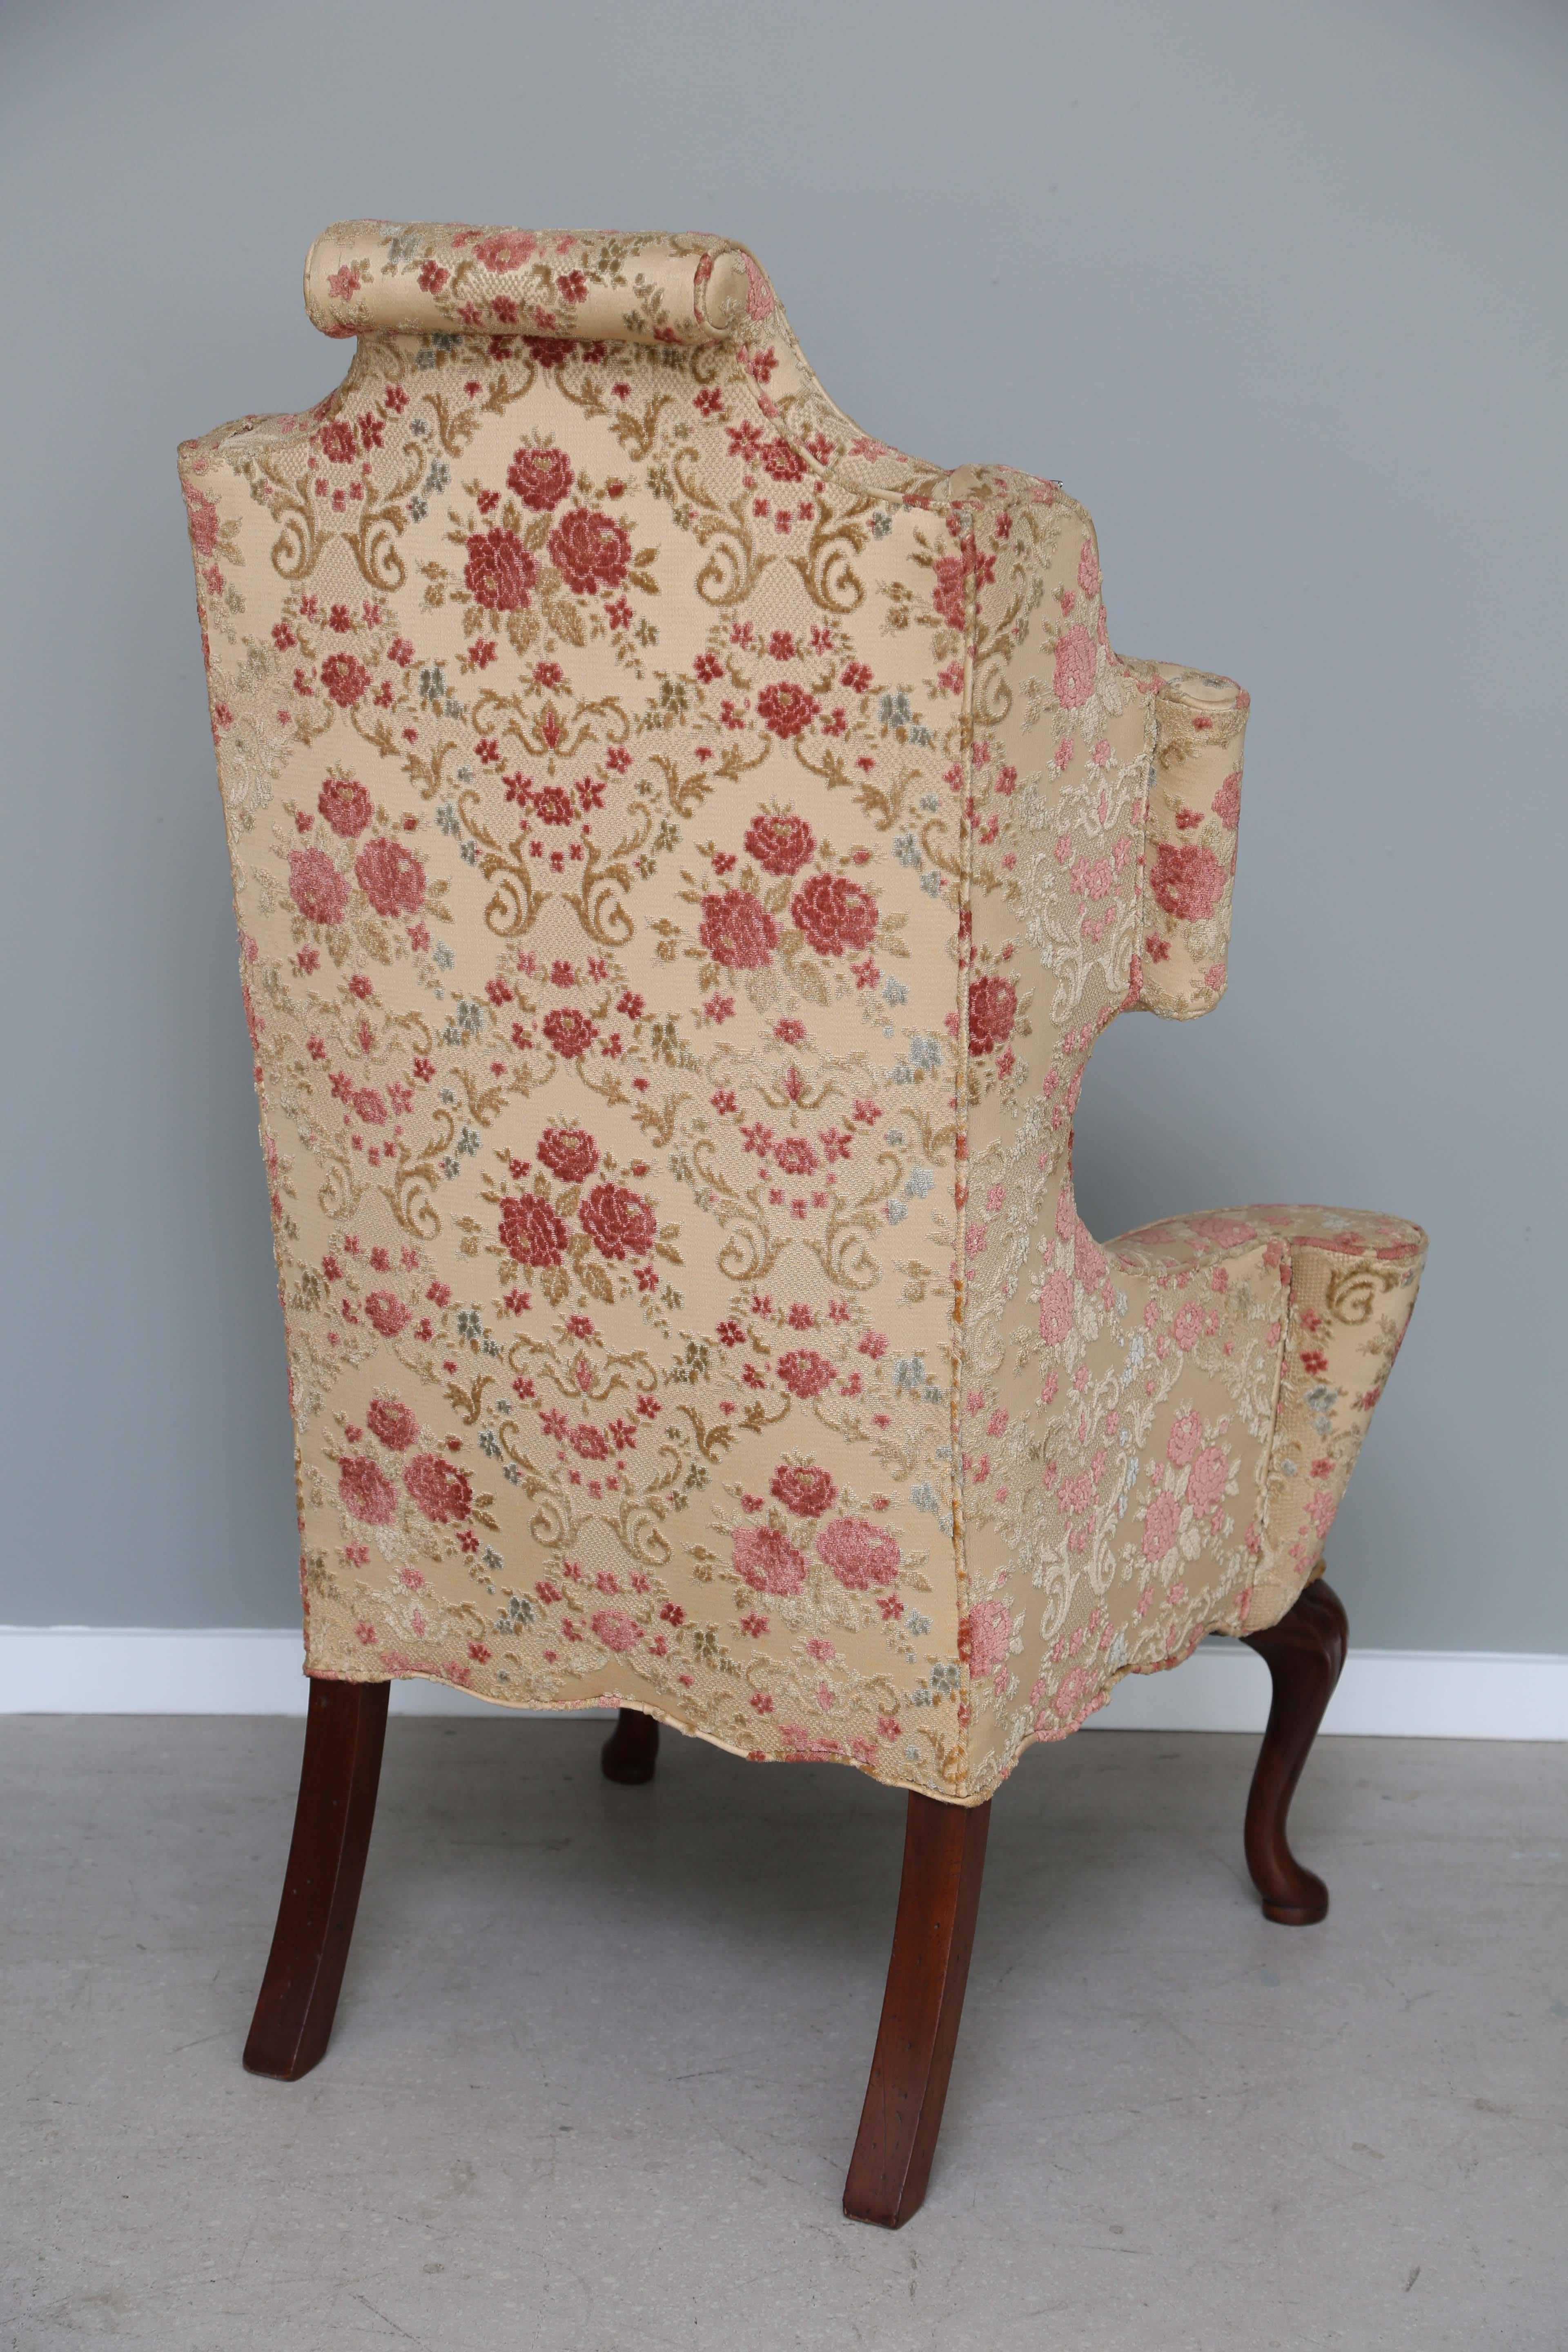 Dynamic Queen Anne Style Chair with Floral Upholstery For Sale 2